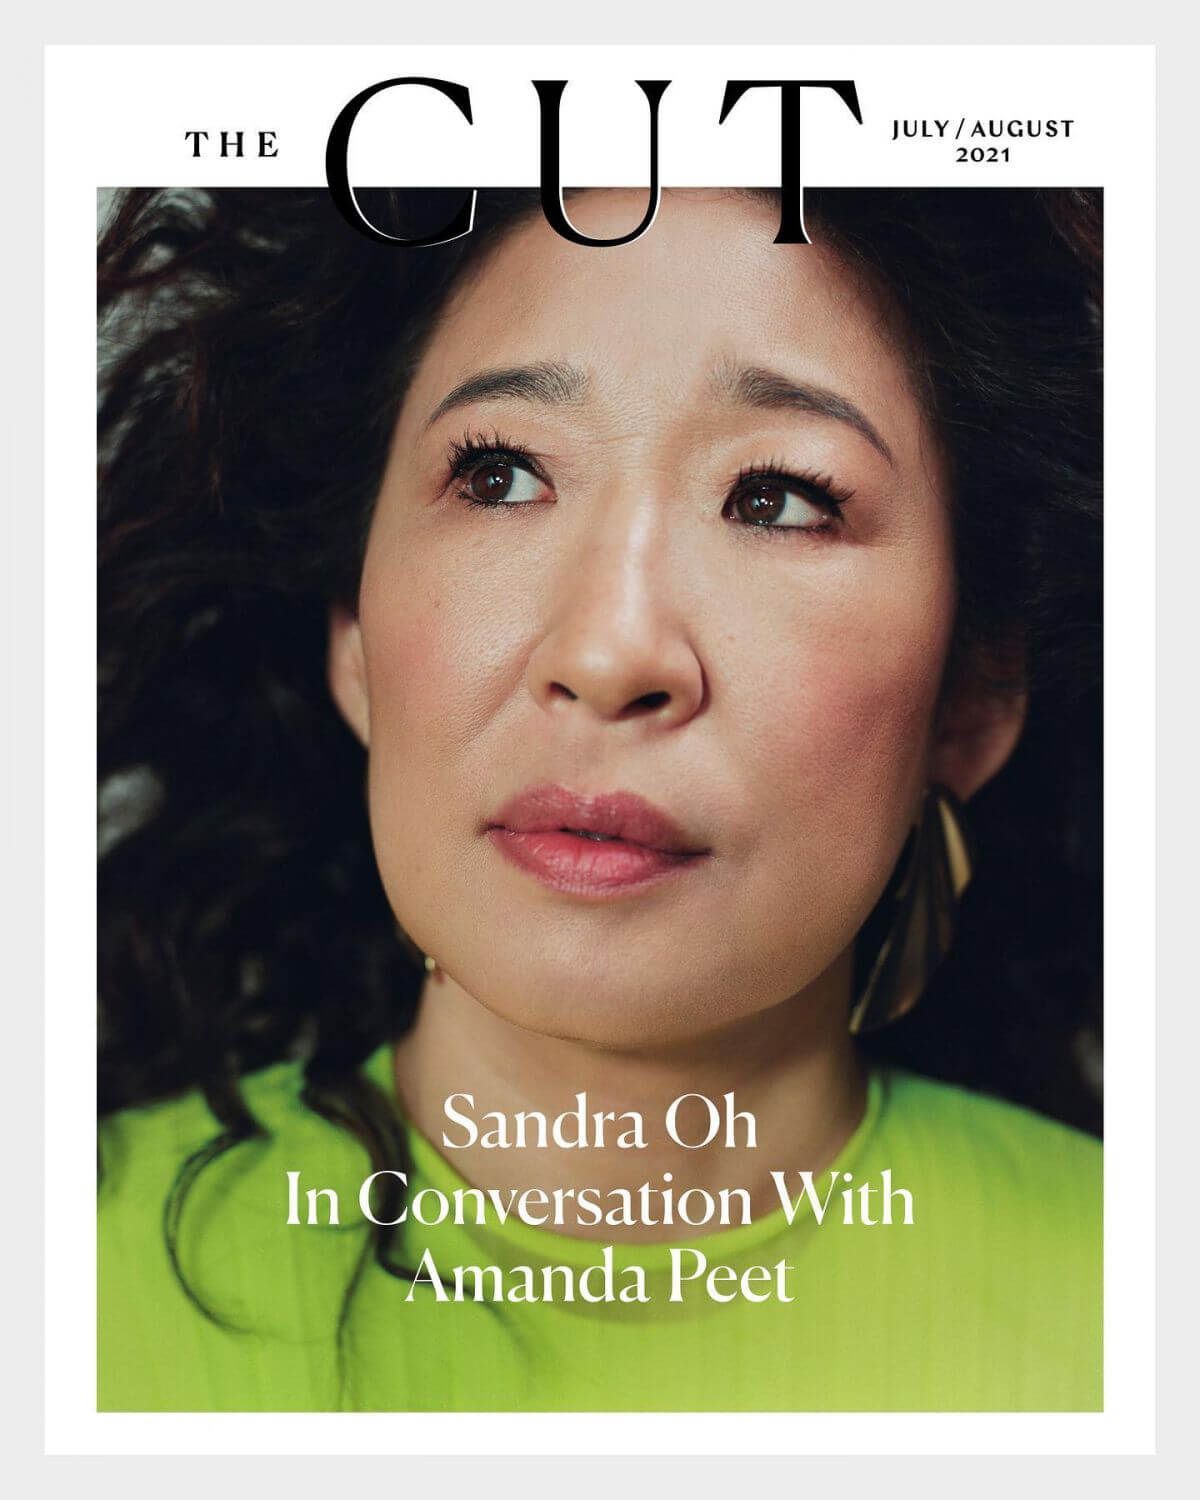 Sandra Oh Photoshoot for The Cut Magazine, July - August 2021